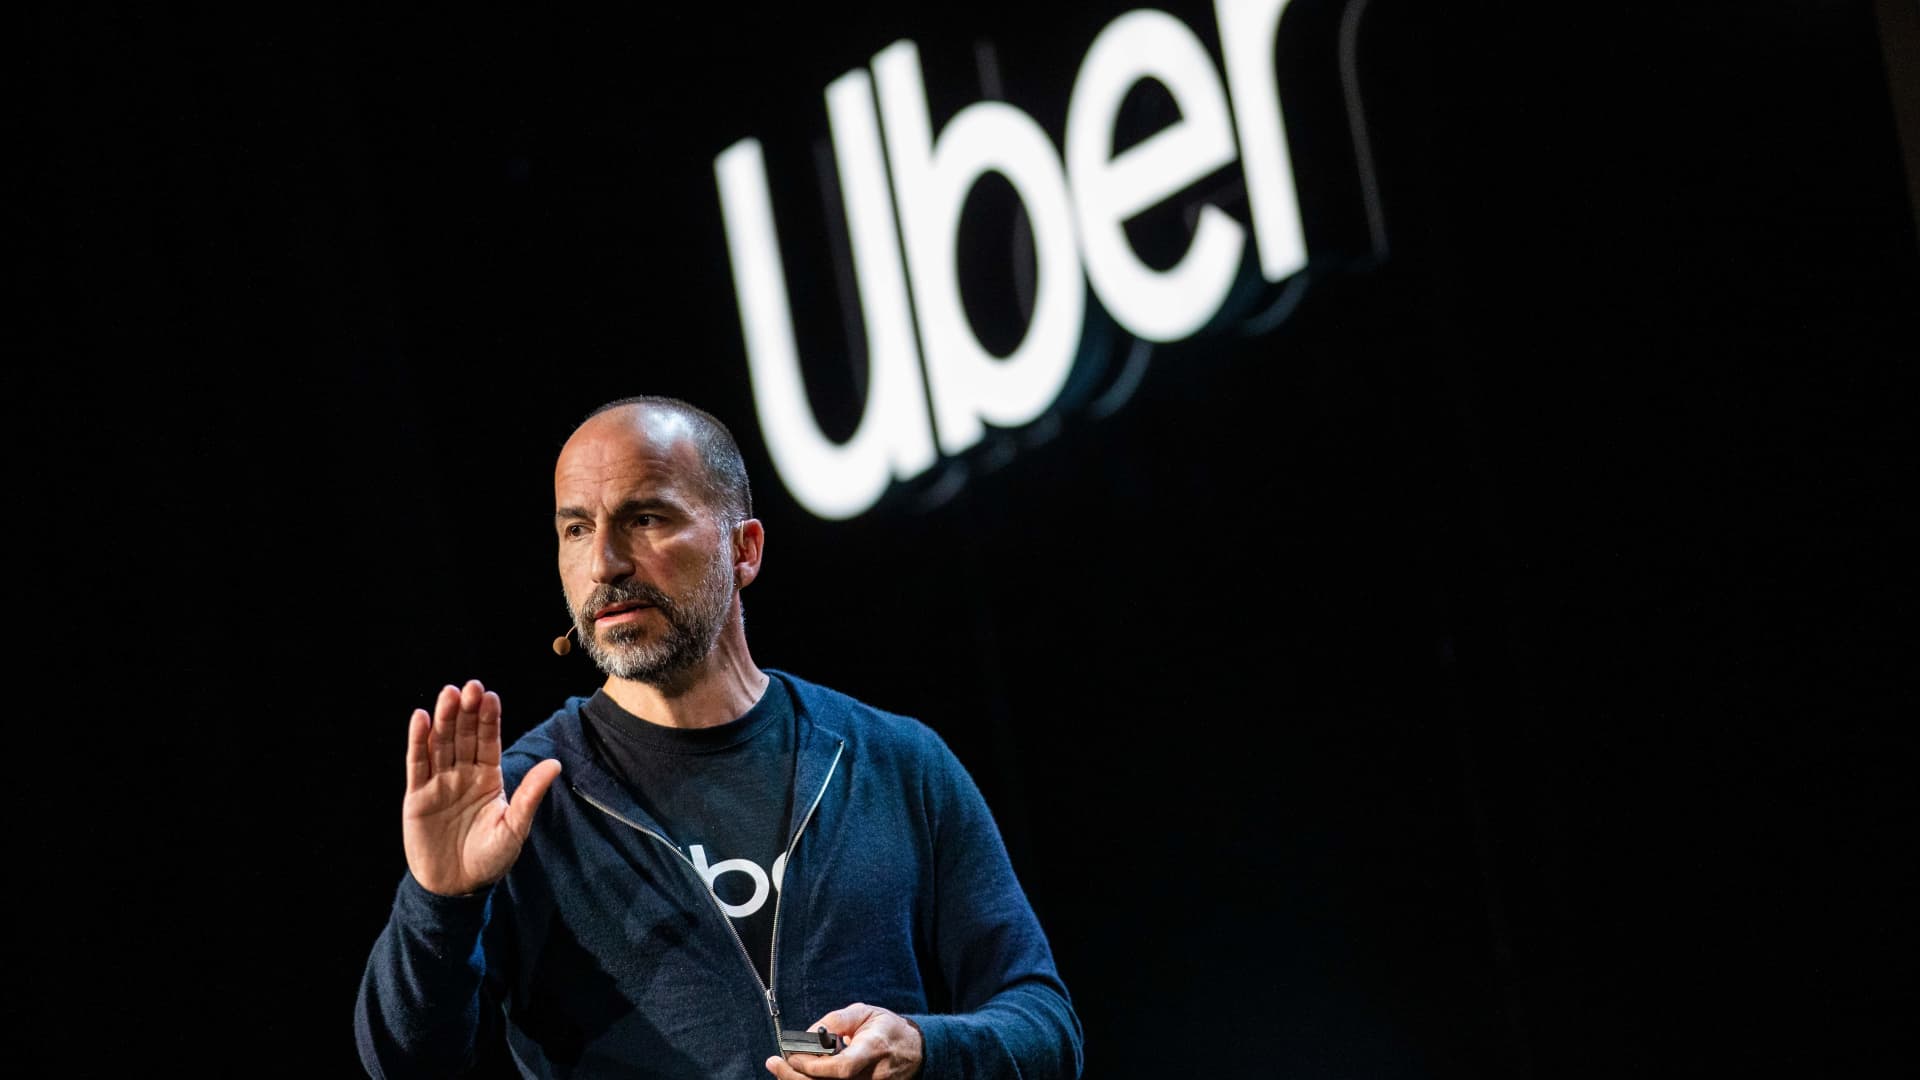 Uber to cut costs, treat hiring as a “privilege”: CEO email